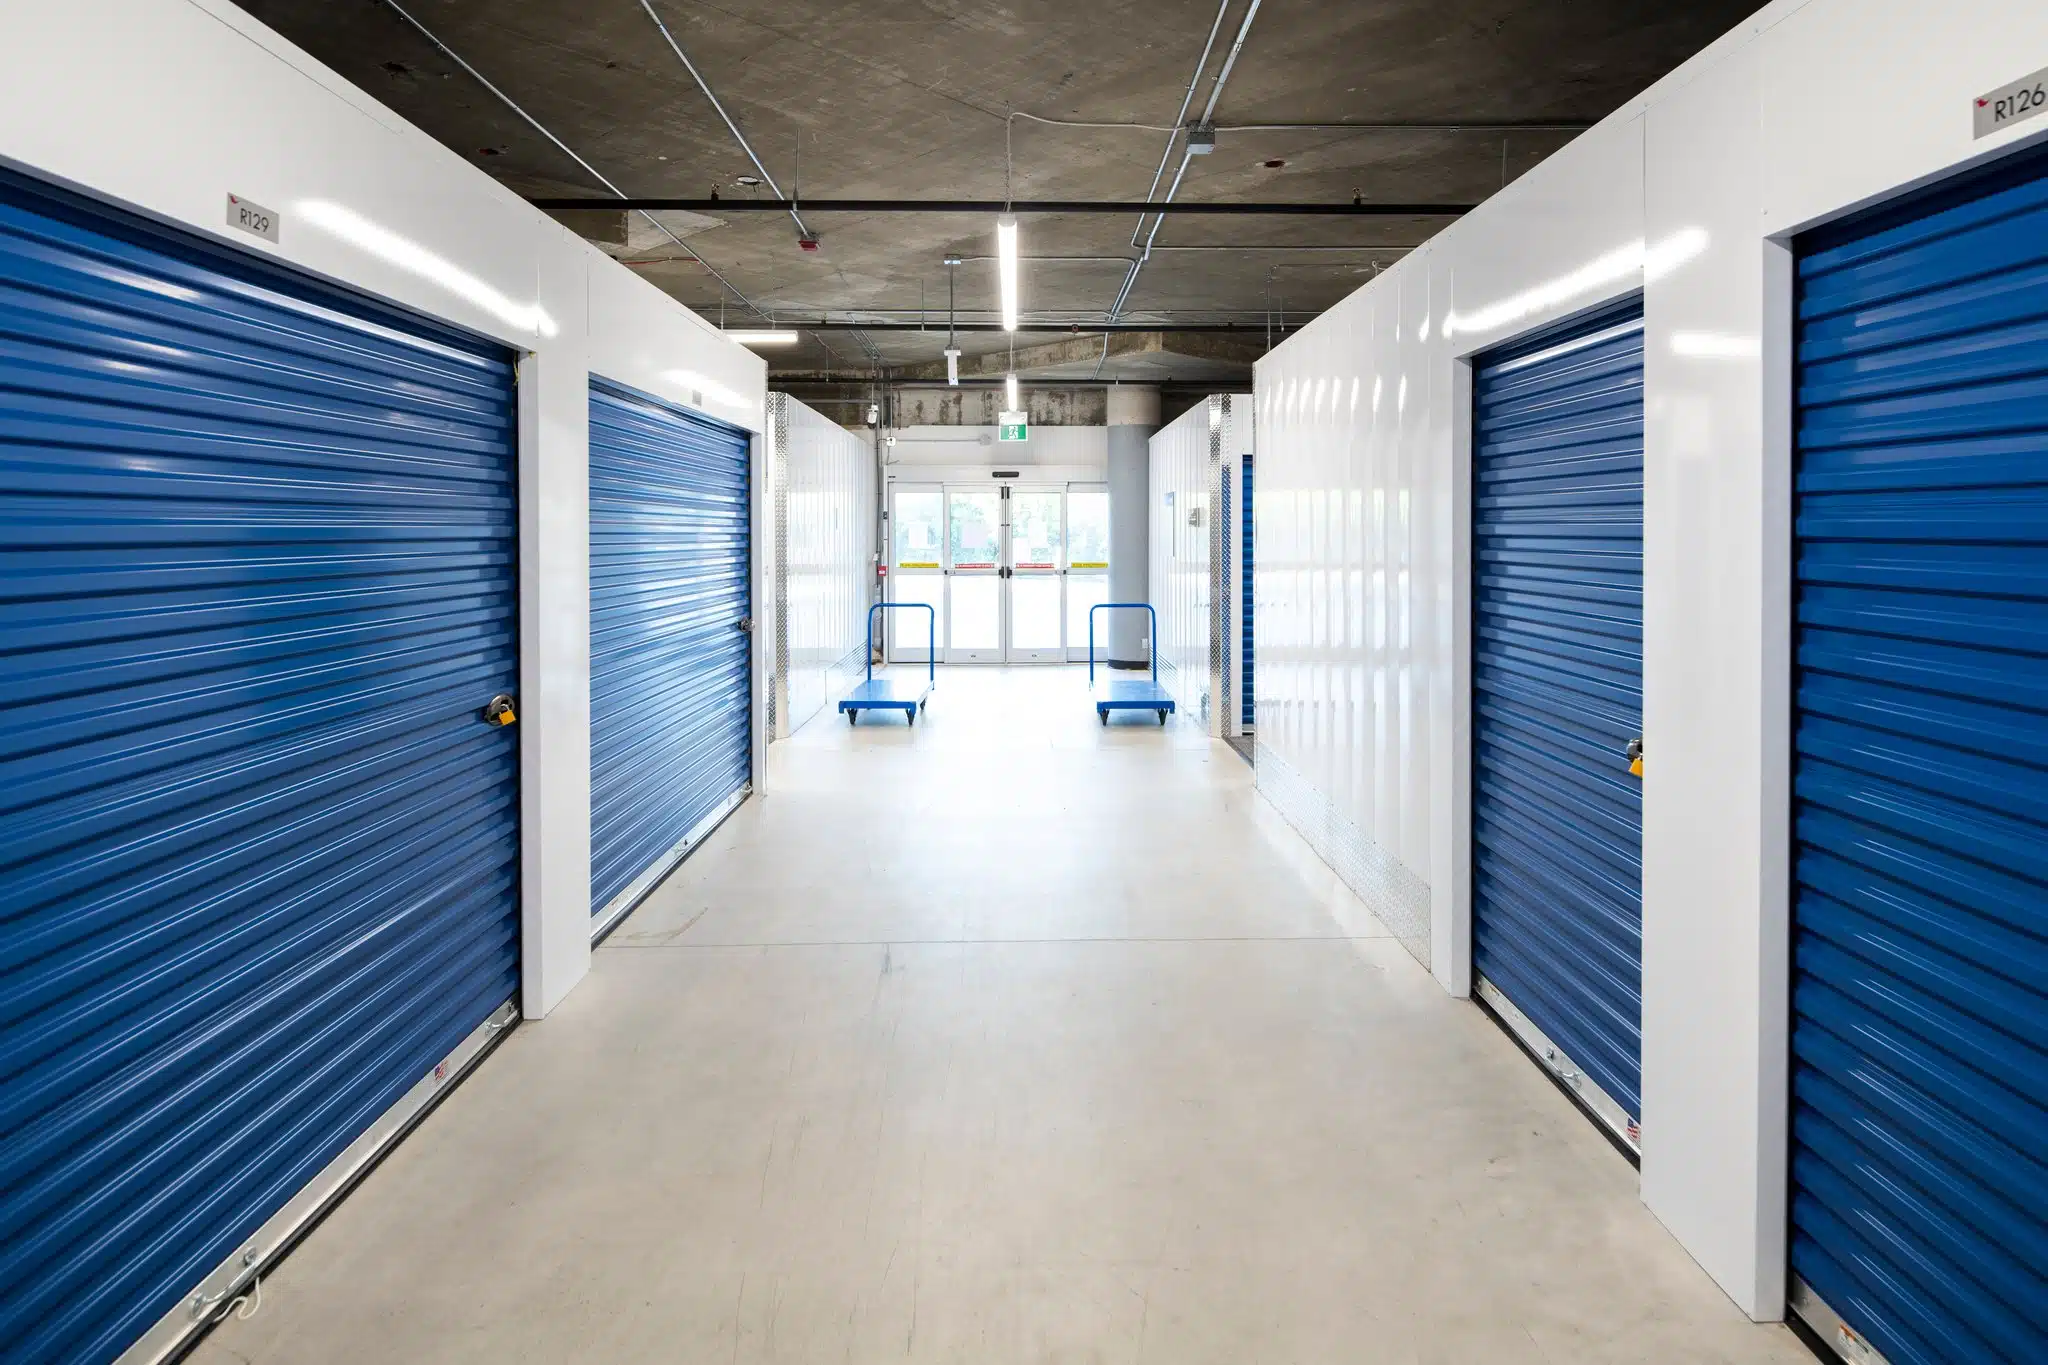 Wide hallways, large storage units, automatic doors and flat beds to help transport items.